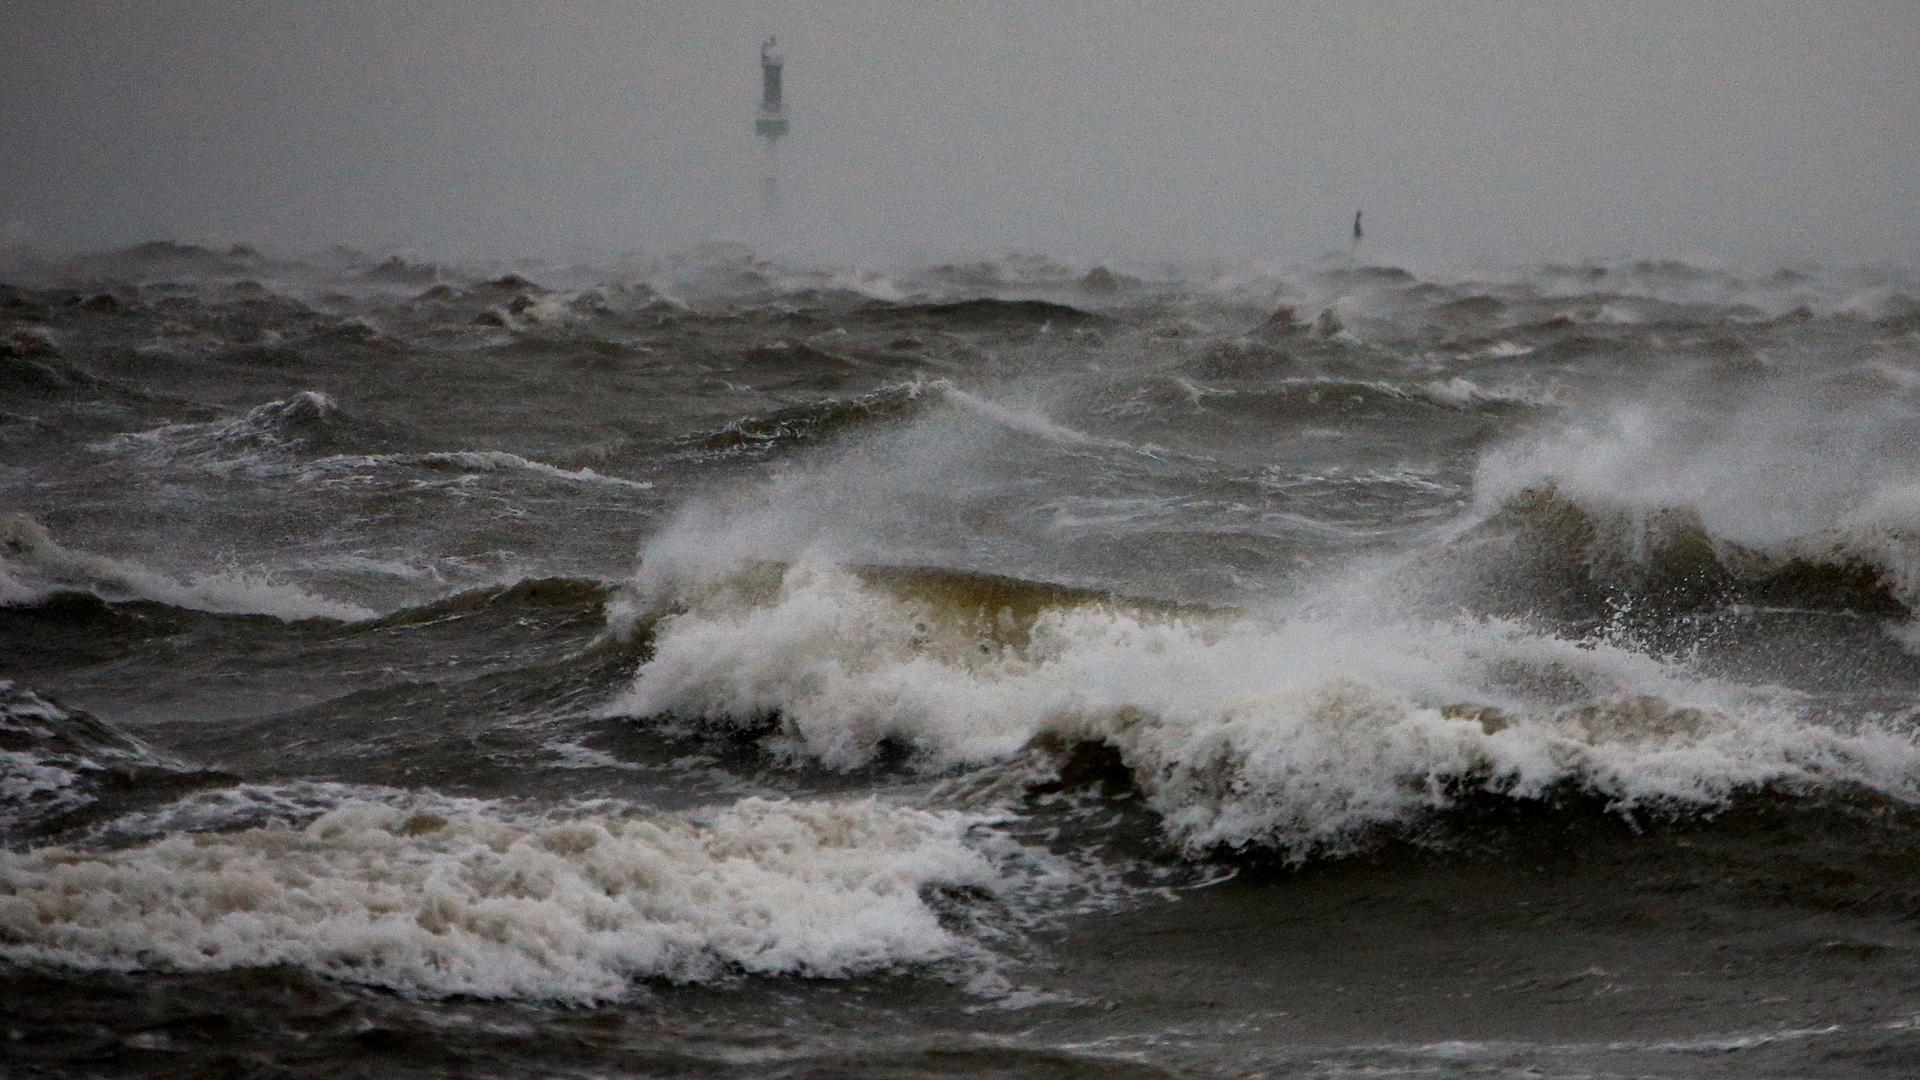 Waves at the North Sea are pictured at a quay wall in Cuxhaven, Germany.